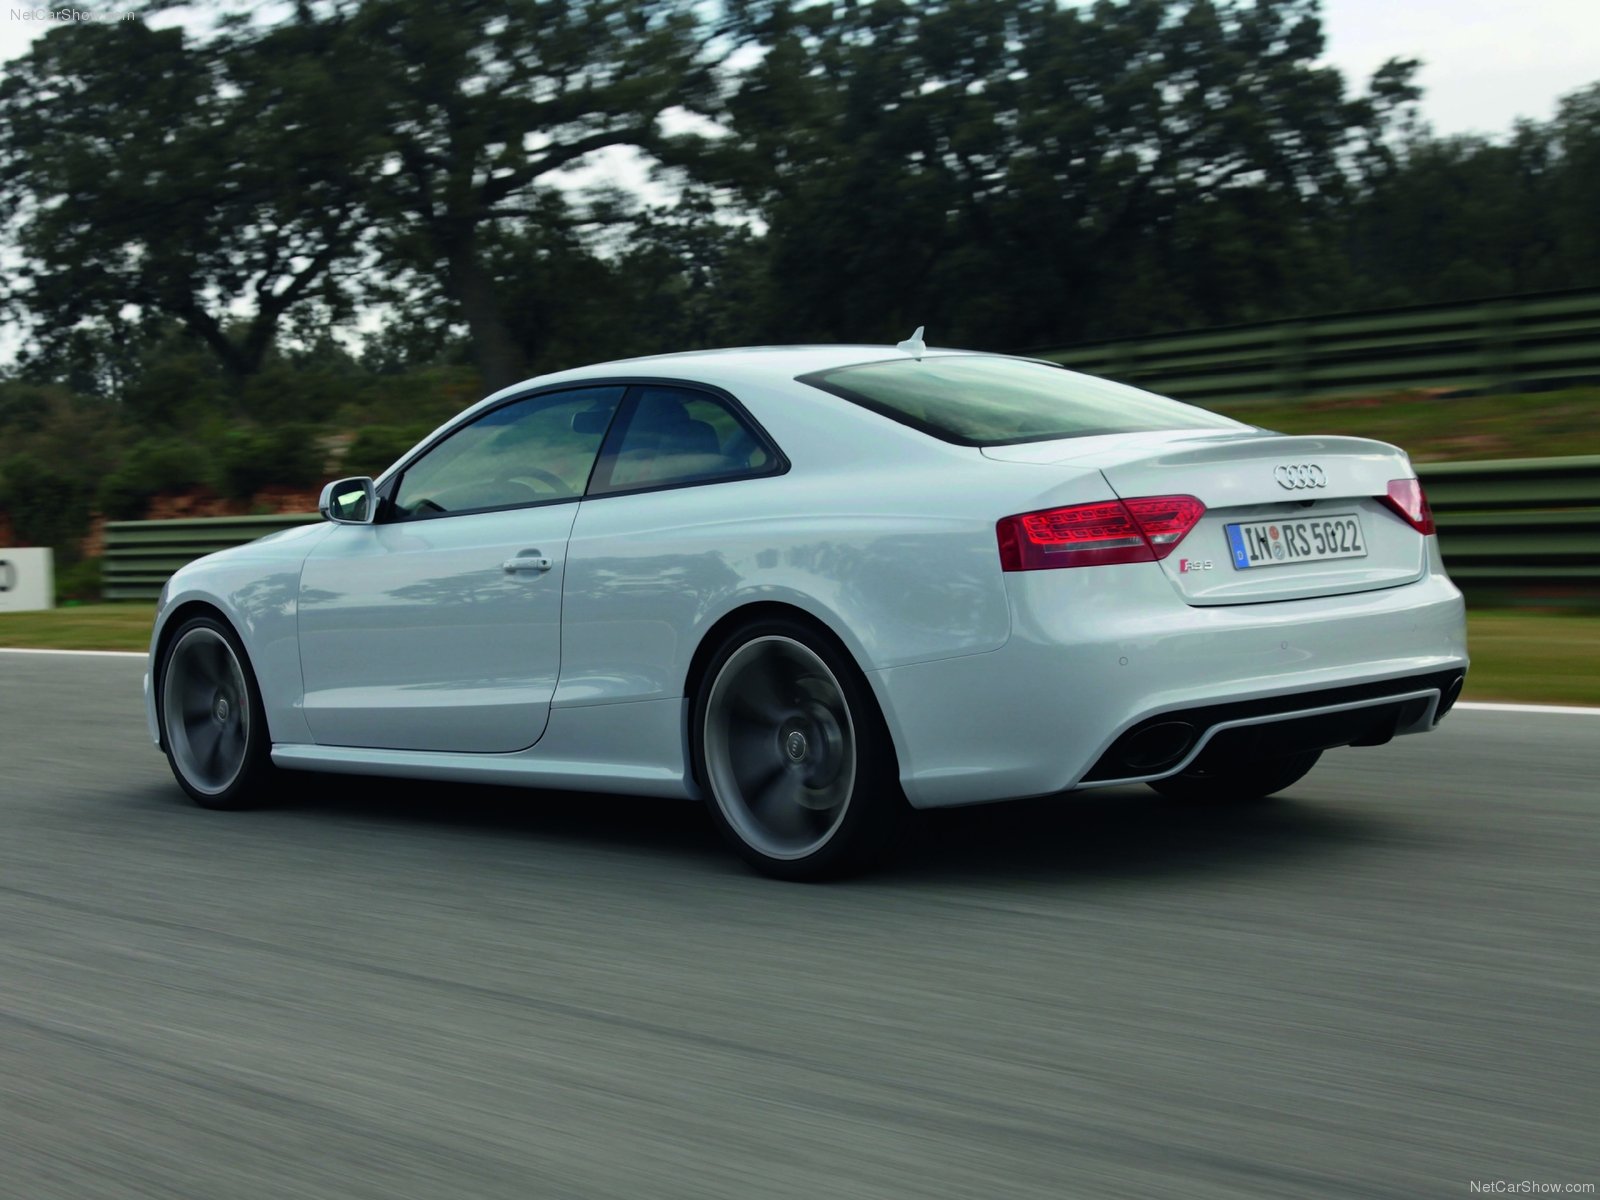 Audi RS5 picture # 73288 | Audi photo gallery | CarsBase.com